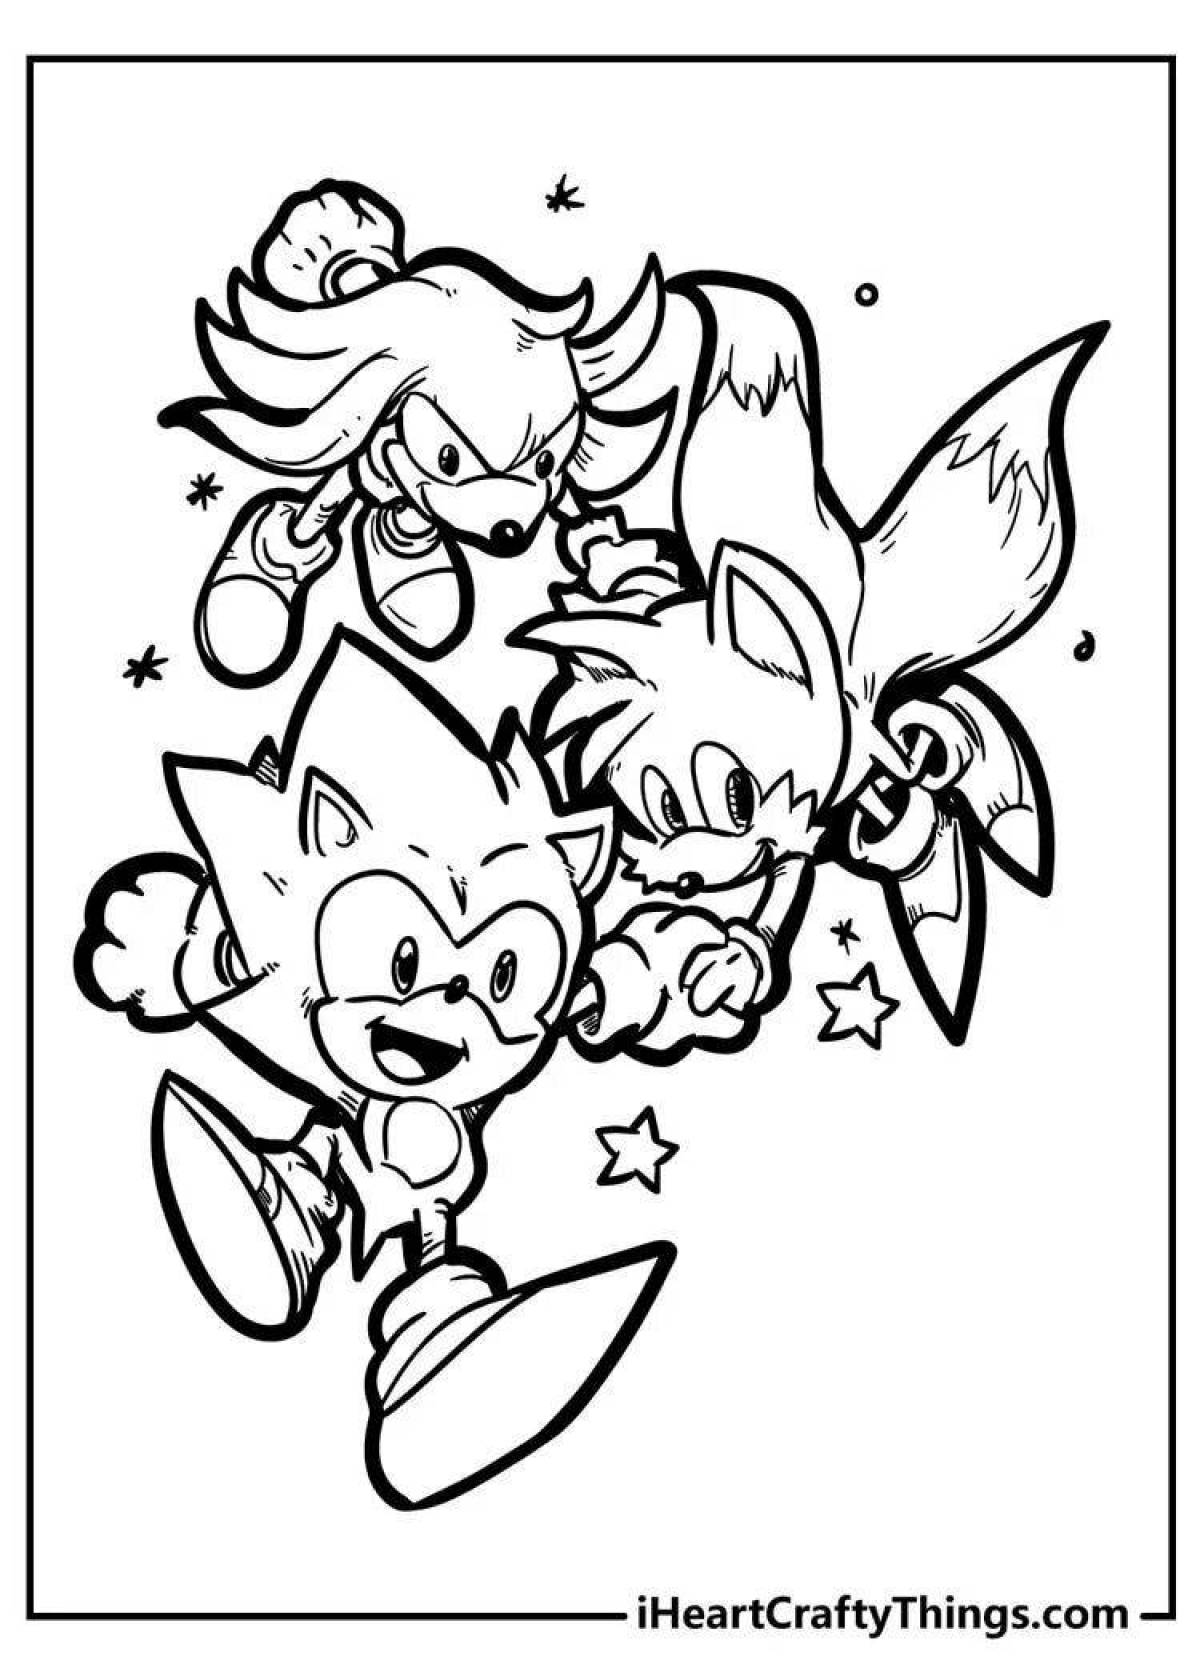 Sonic the Hedgehog 2 Coloring Pages/Sonic, Tails, Knuckles Coloring